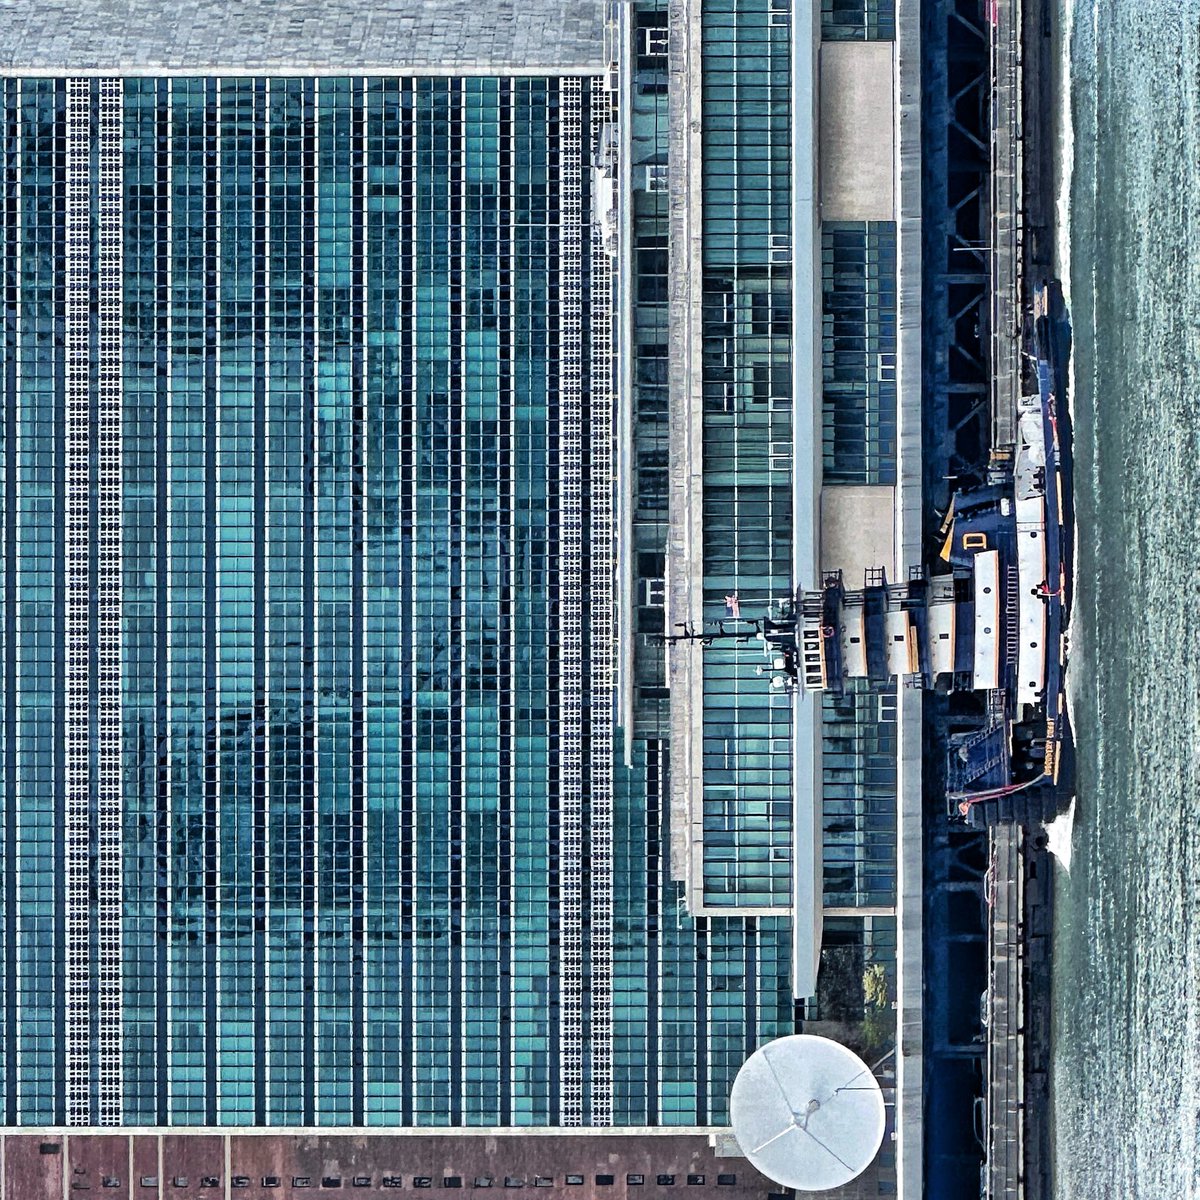 Mixed media. #un #windows #architecture #grid #lines #circle #boxesinboxes #eastriver #unitednations #tugboat #subjectivelyobjective #nyc